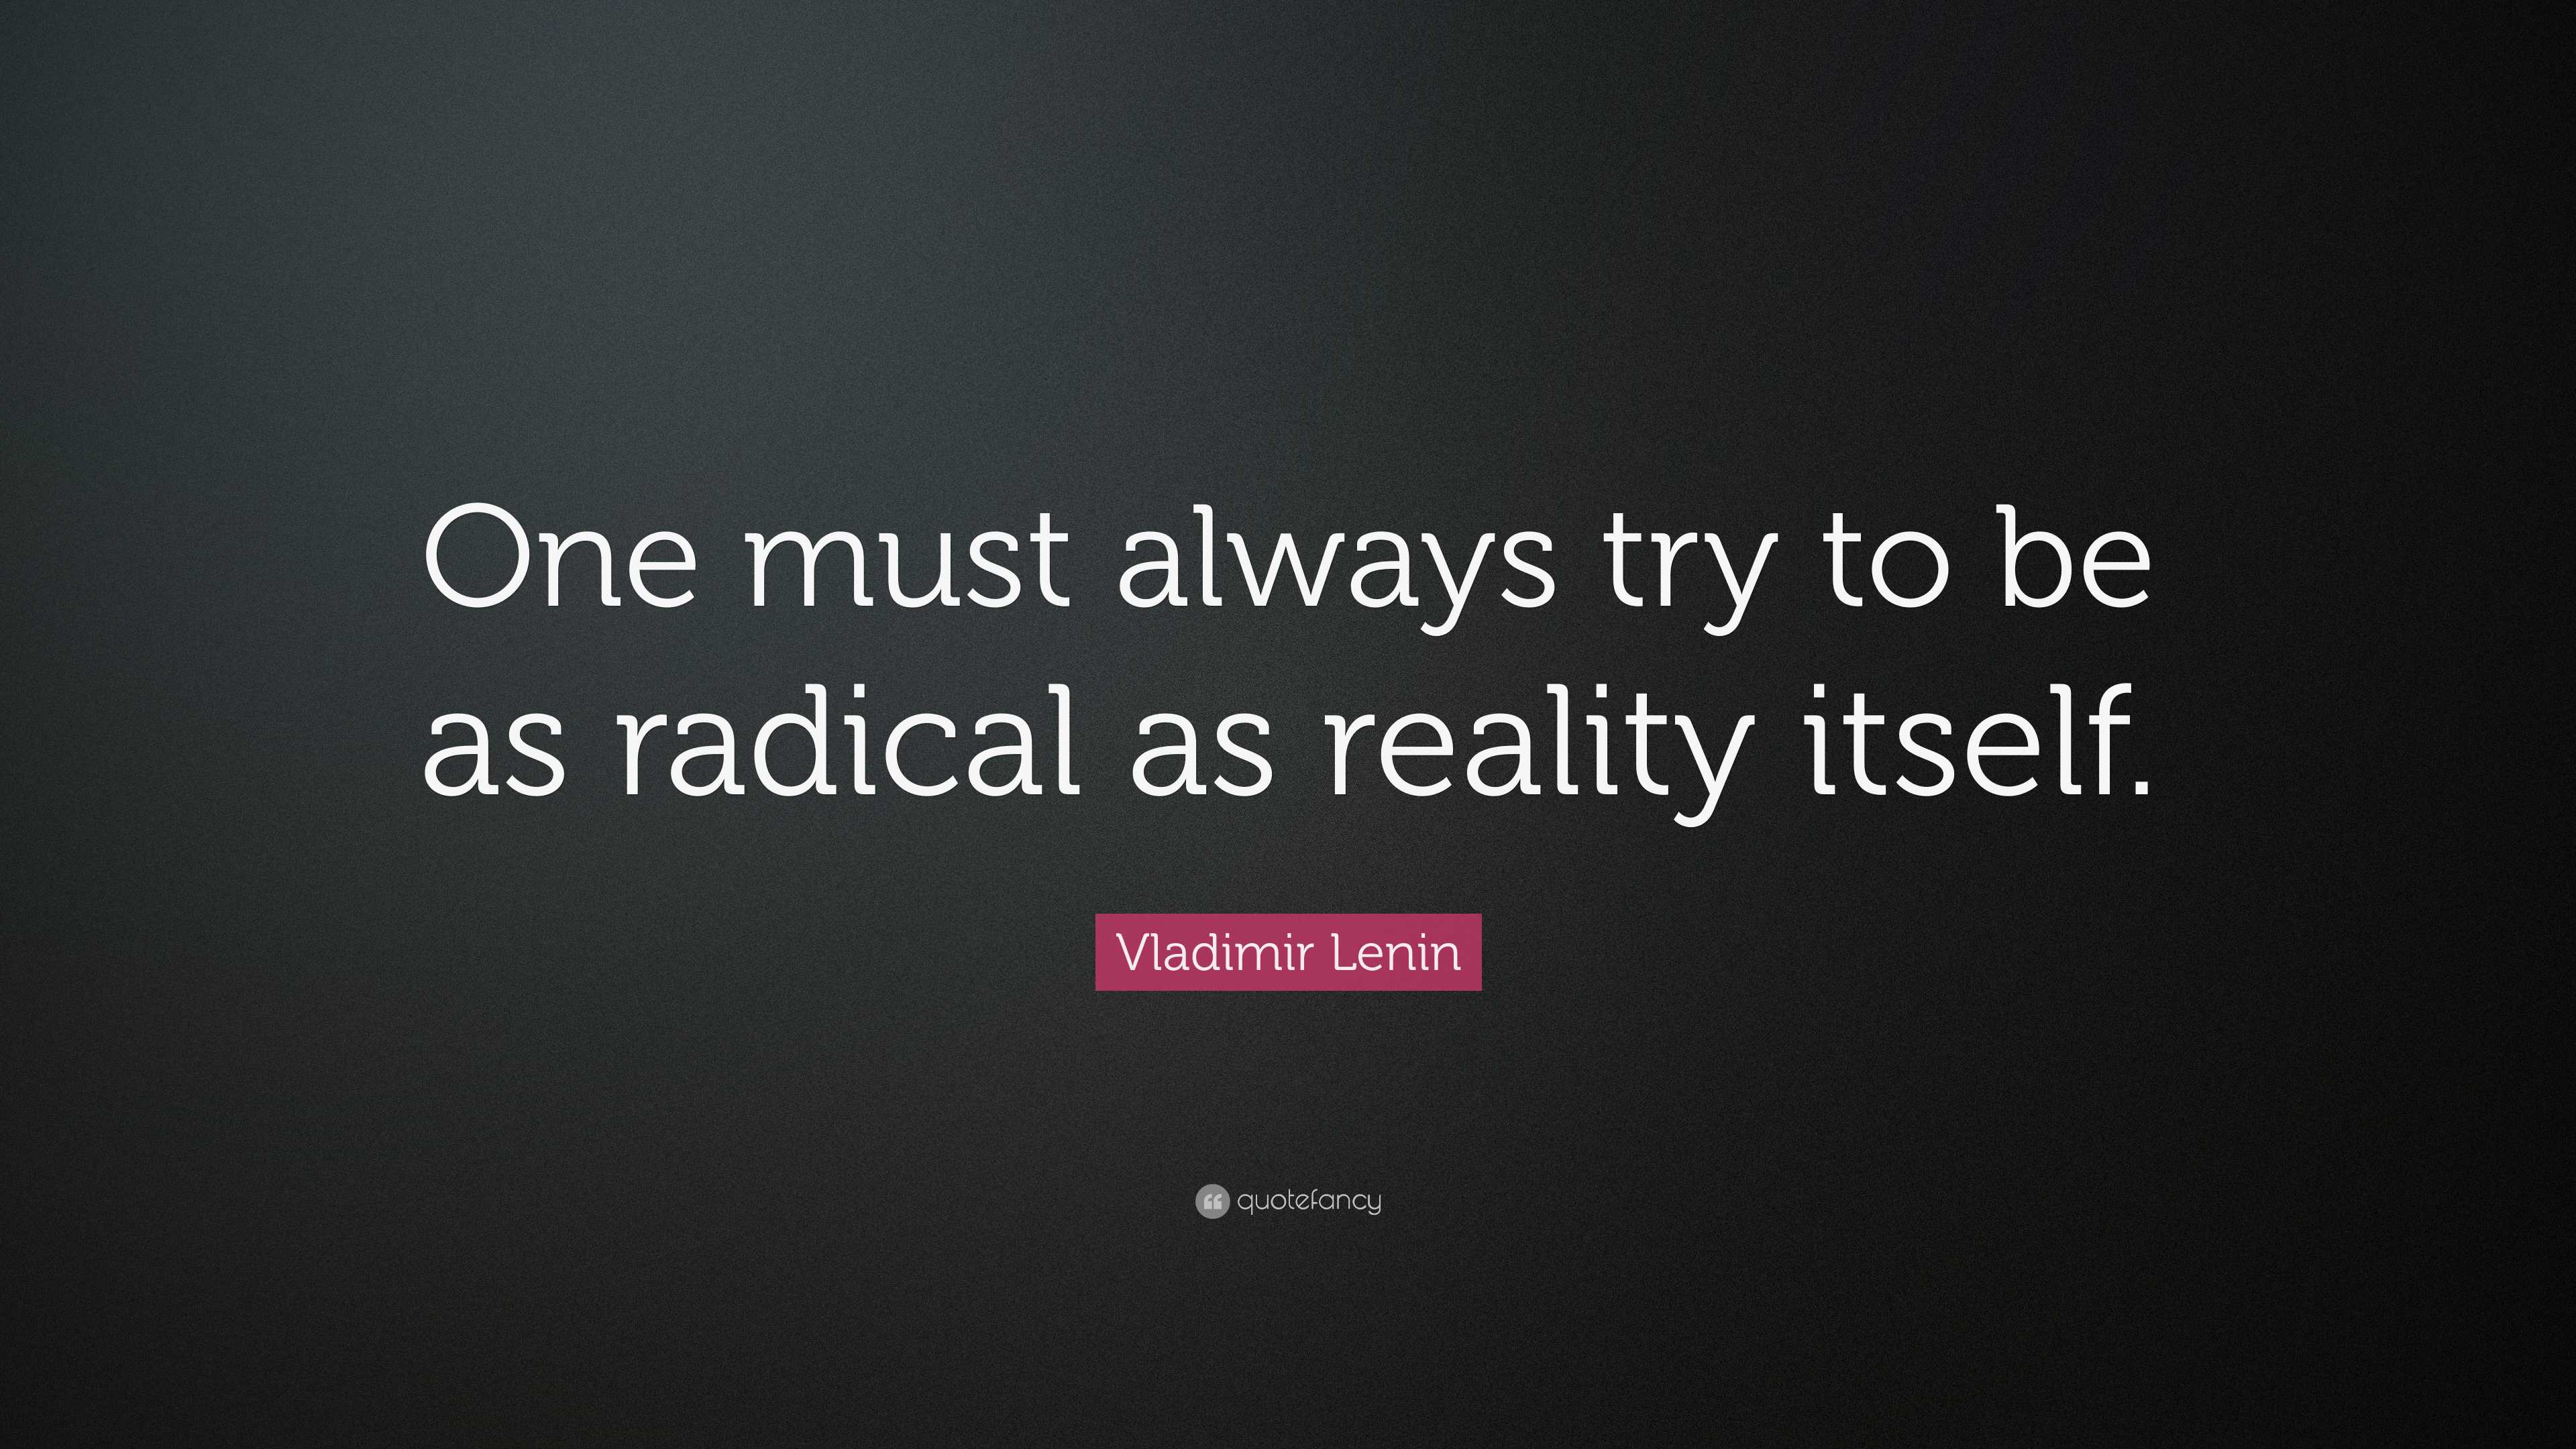 Vladimir Lenin Quote: “One must always try to be as radical as reality ...